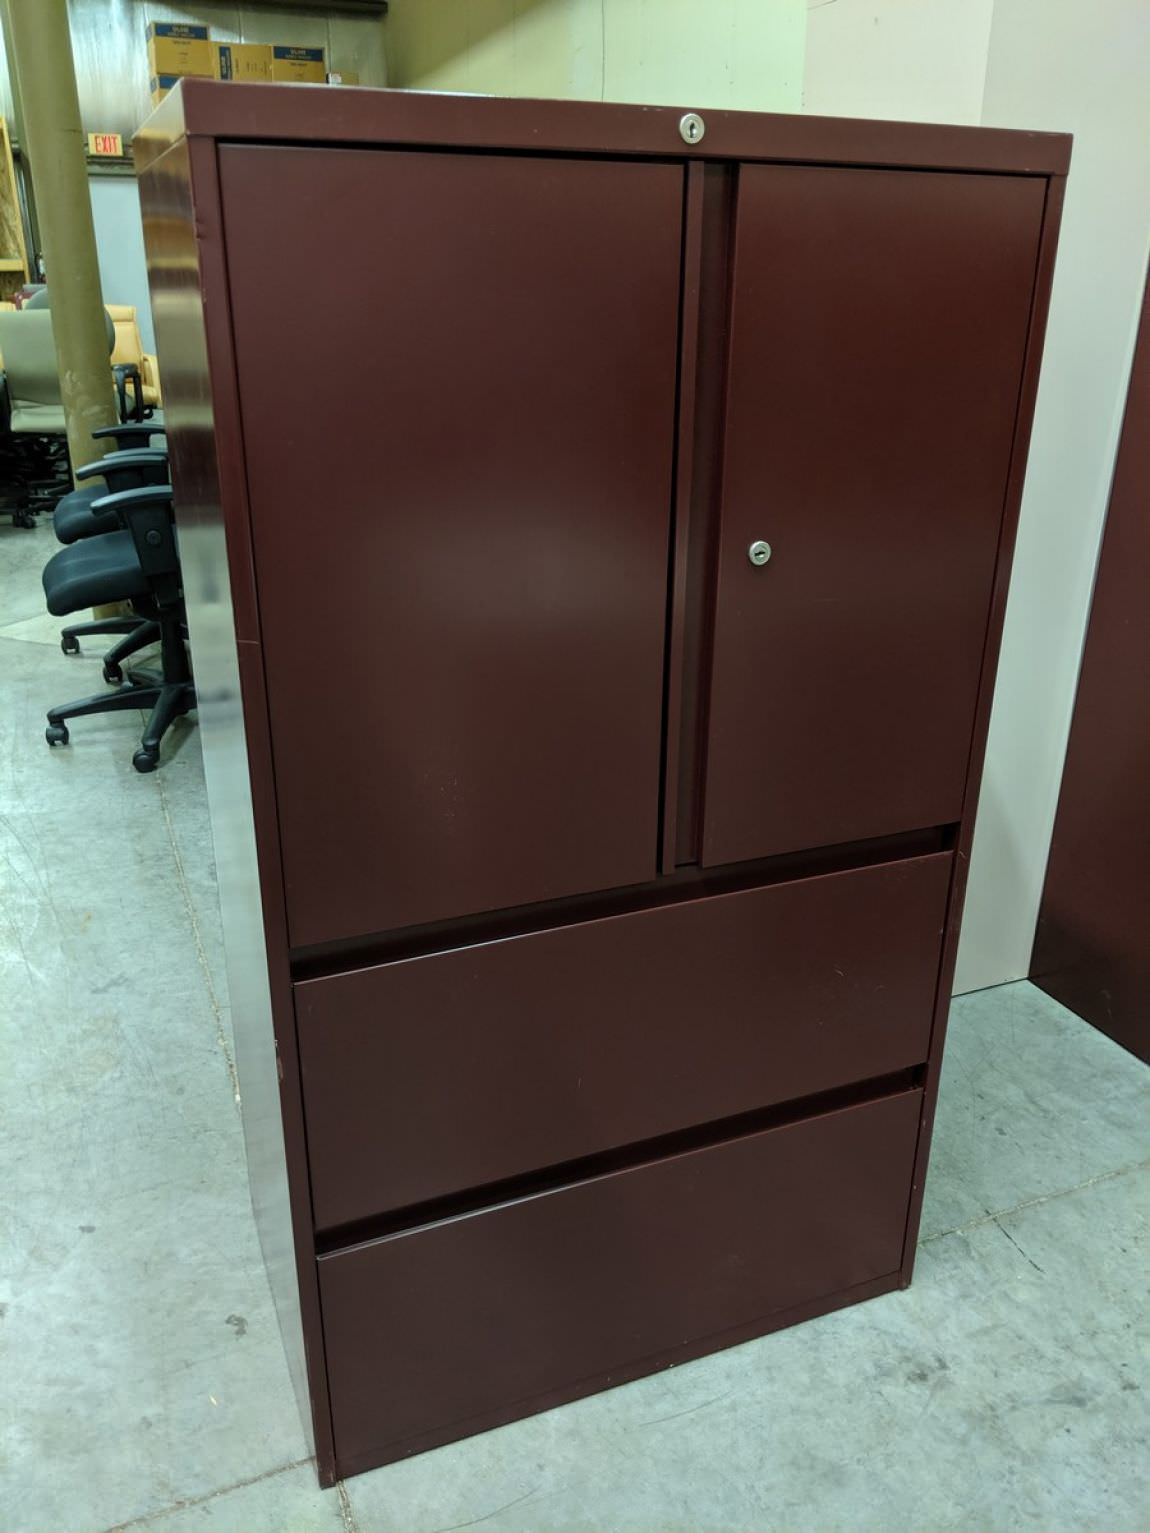 Steelcase Burgundy Storage Cabinet with 2 Lateral Drawers